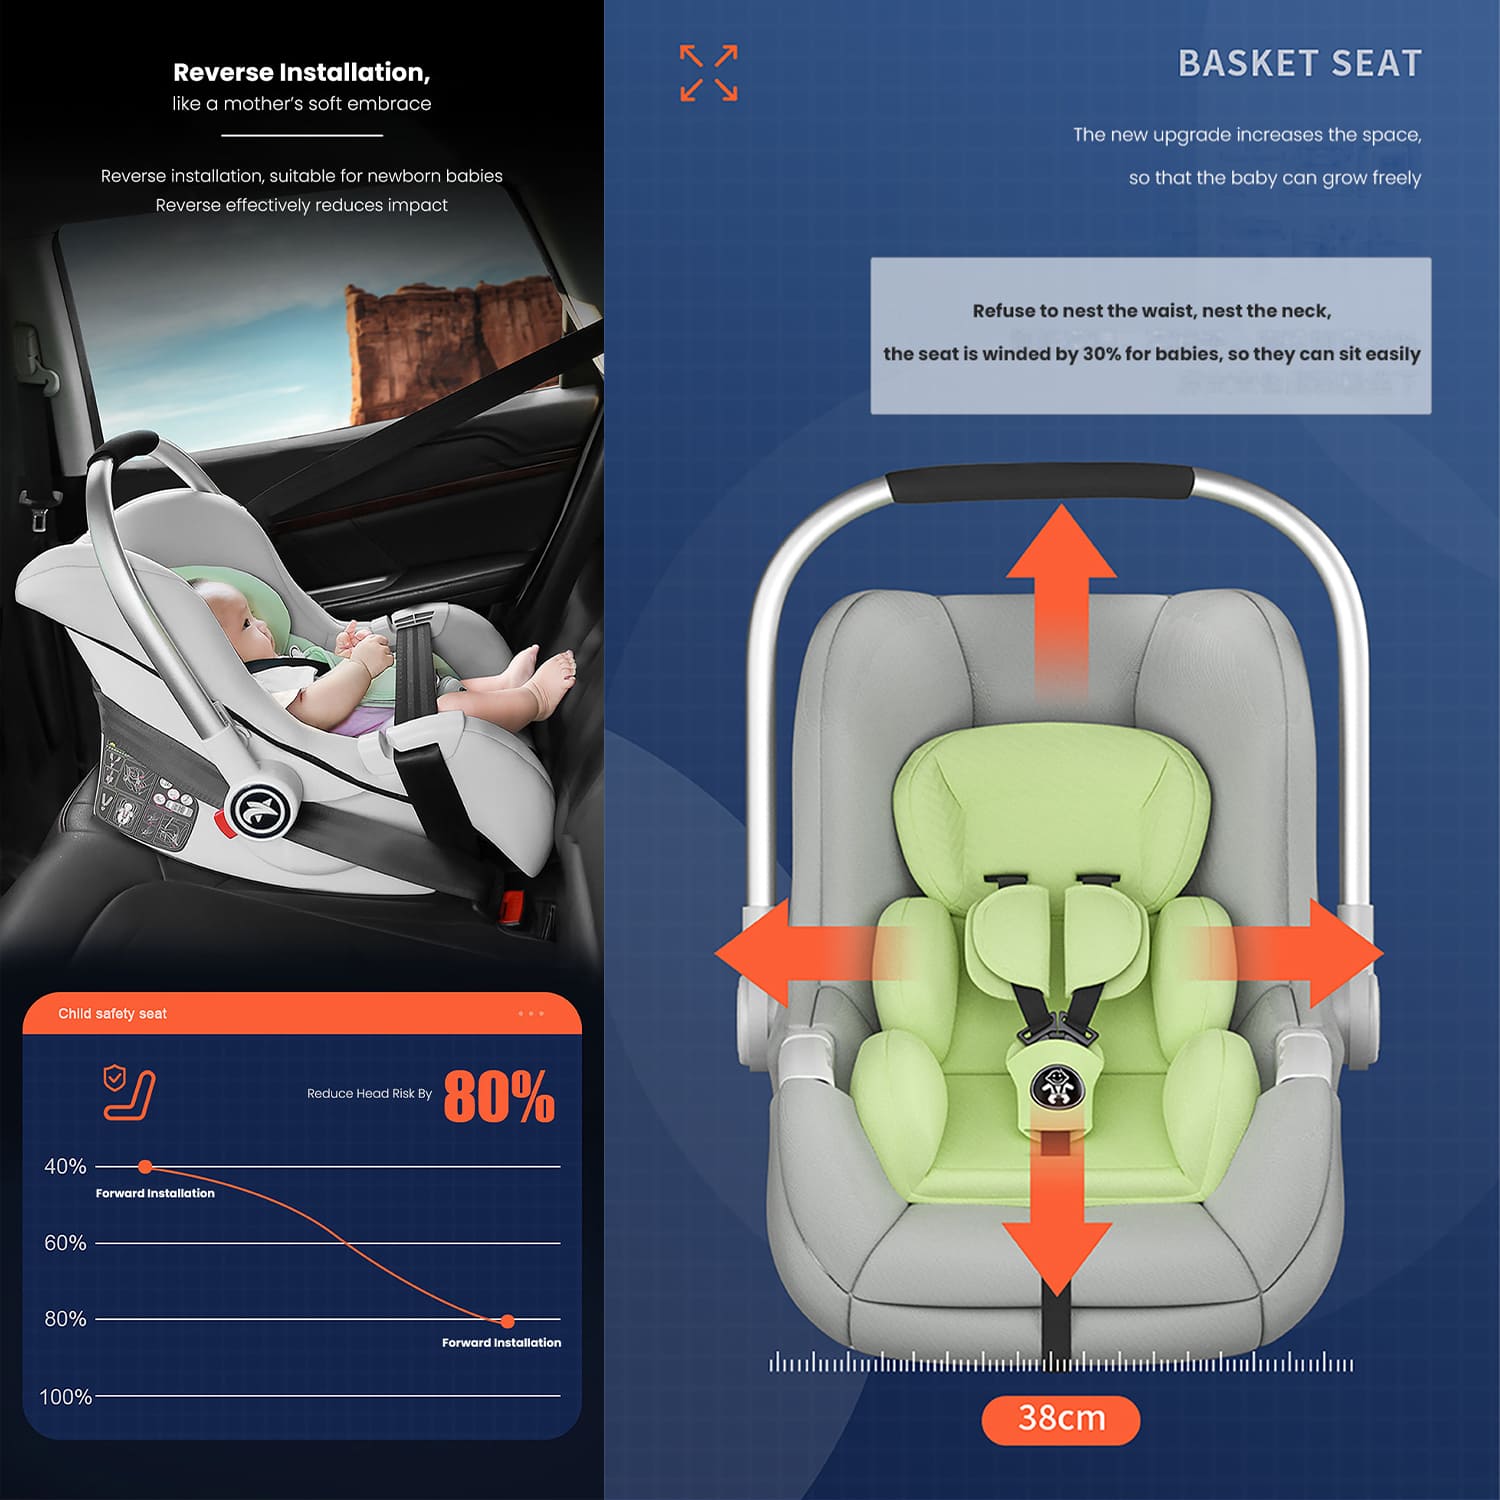 Baby Carry Cot cum Car Seat - Safe and Convenient Travel Solution